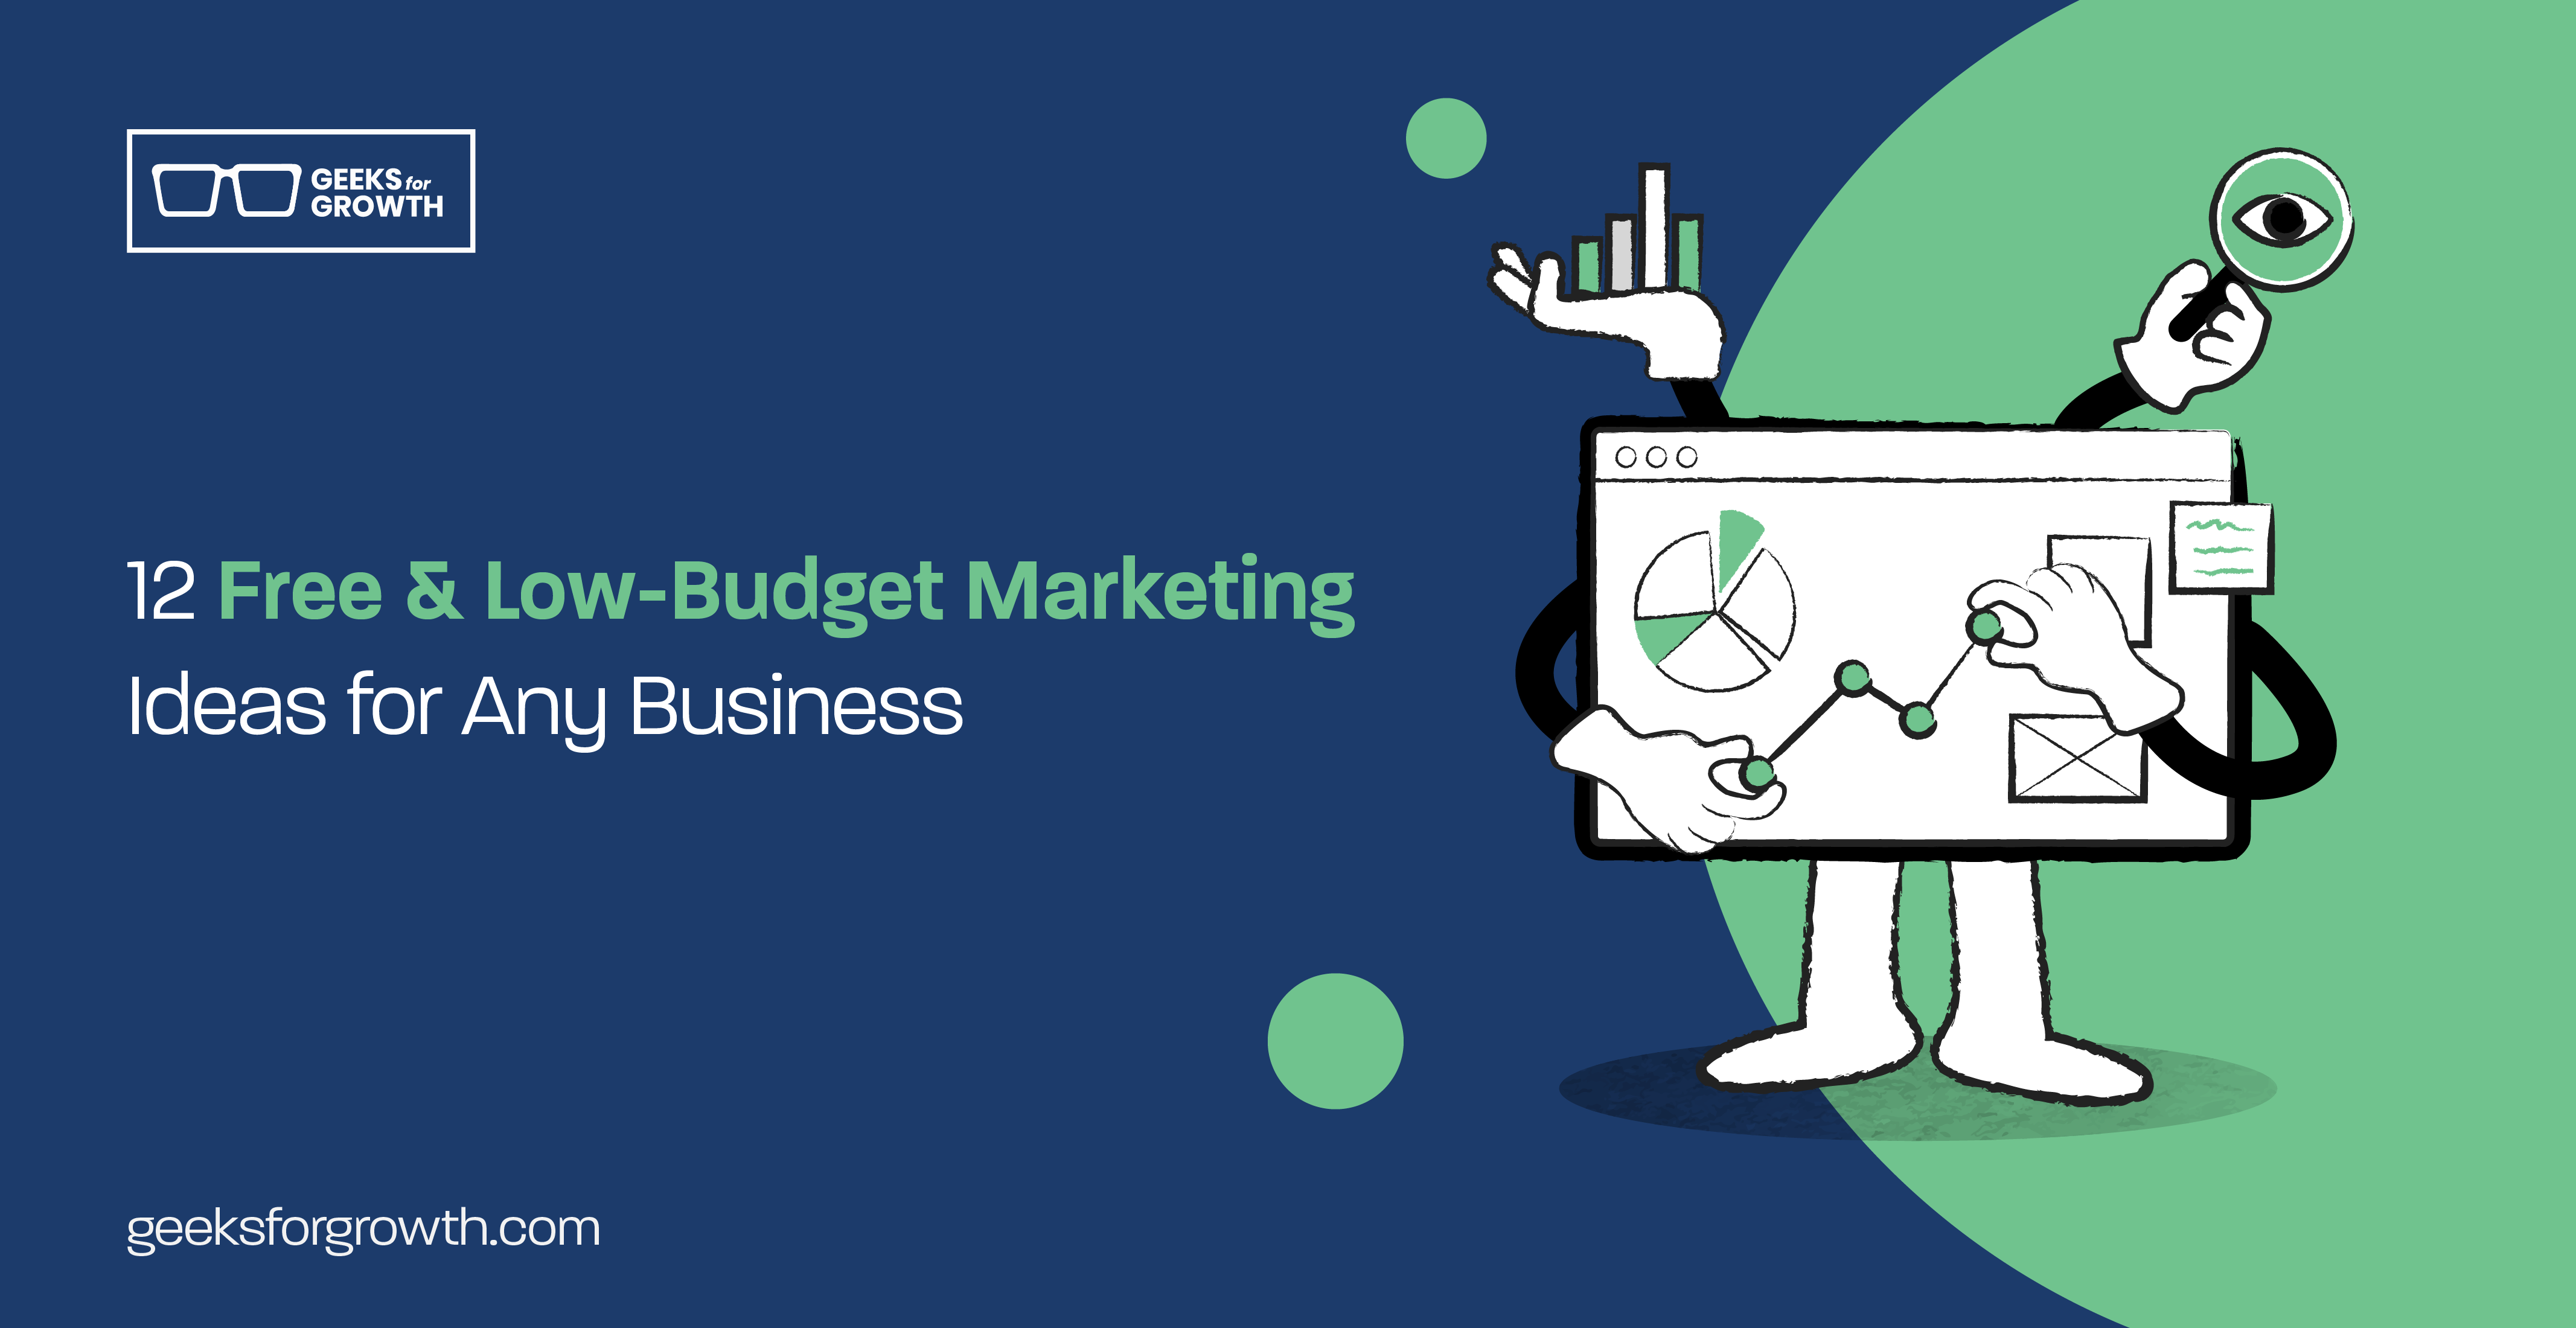 12 Free & Low-Budget Marketing Ideas for Any Business